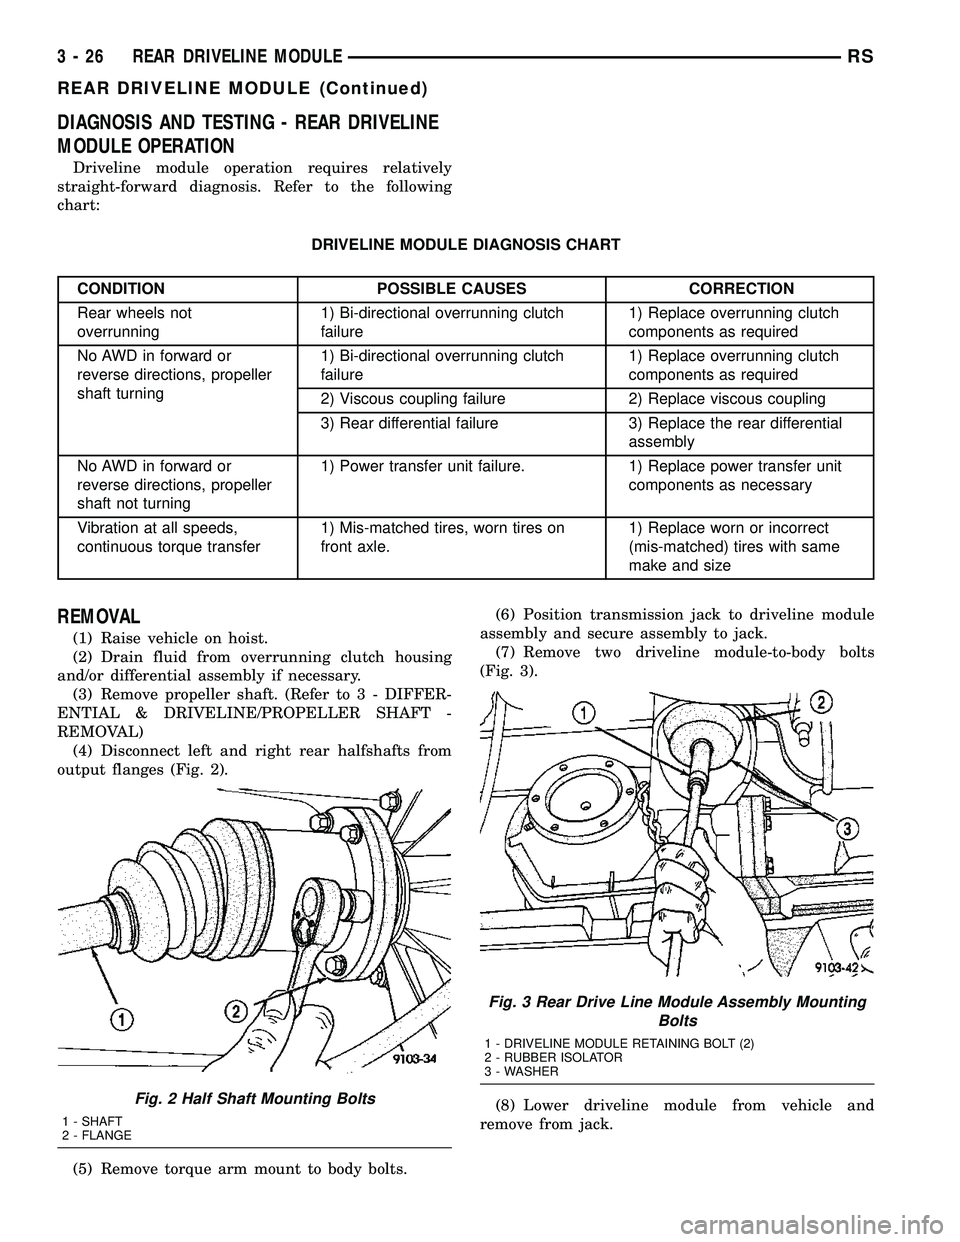 DODGE TOWN AND COUNTRY 2004  Service Manual DIAGNOSIS AND TESTING - REAR DRIVELINE
MODULE OPERATION
Driveline module operation requires relatively
straight-forward diagnosis. Refer to the following
chart:
DRIVELINE MODULE DIAGNOSIS CHART
CONDIT